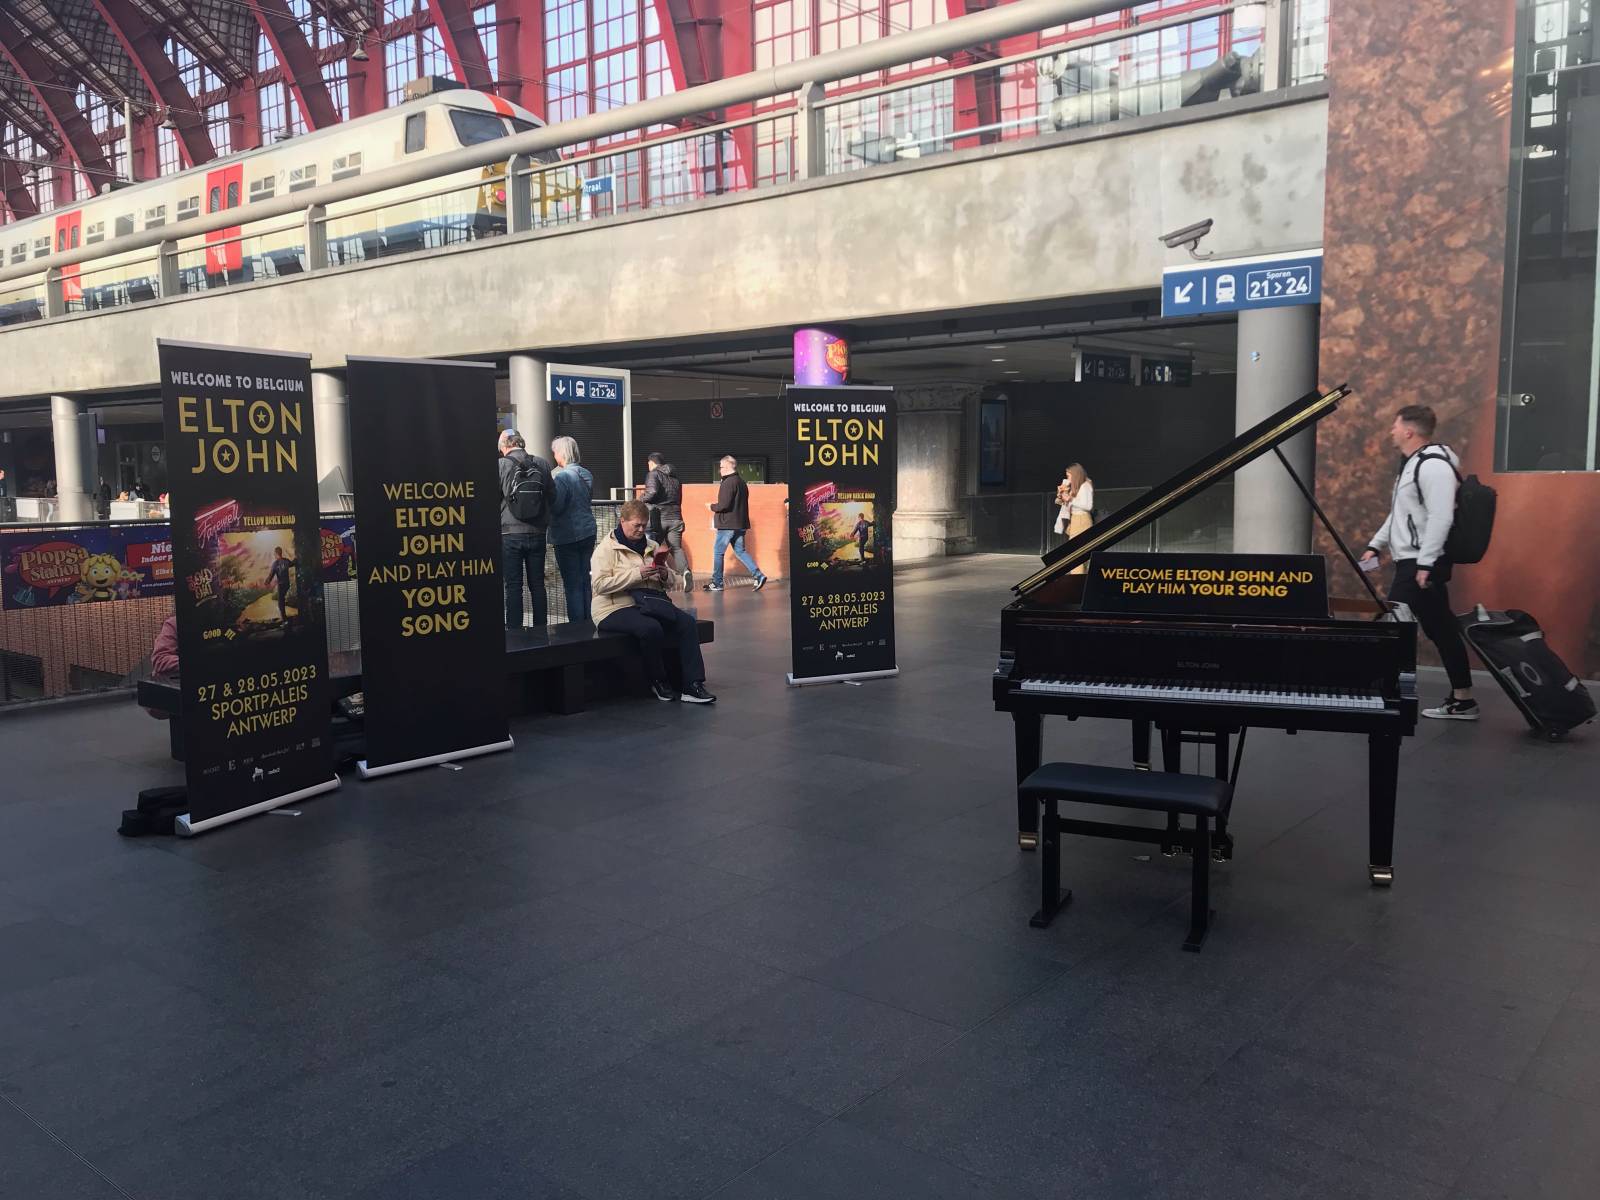 Piano located in the Antwerpen train station.